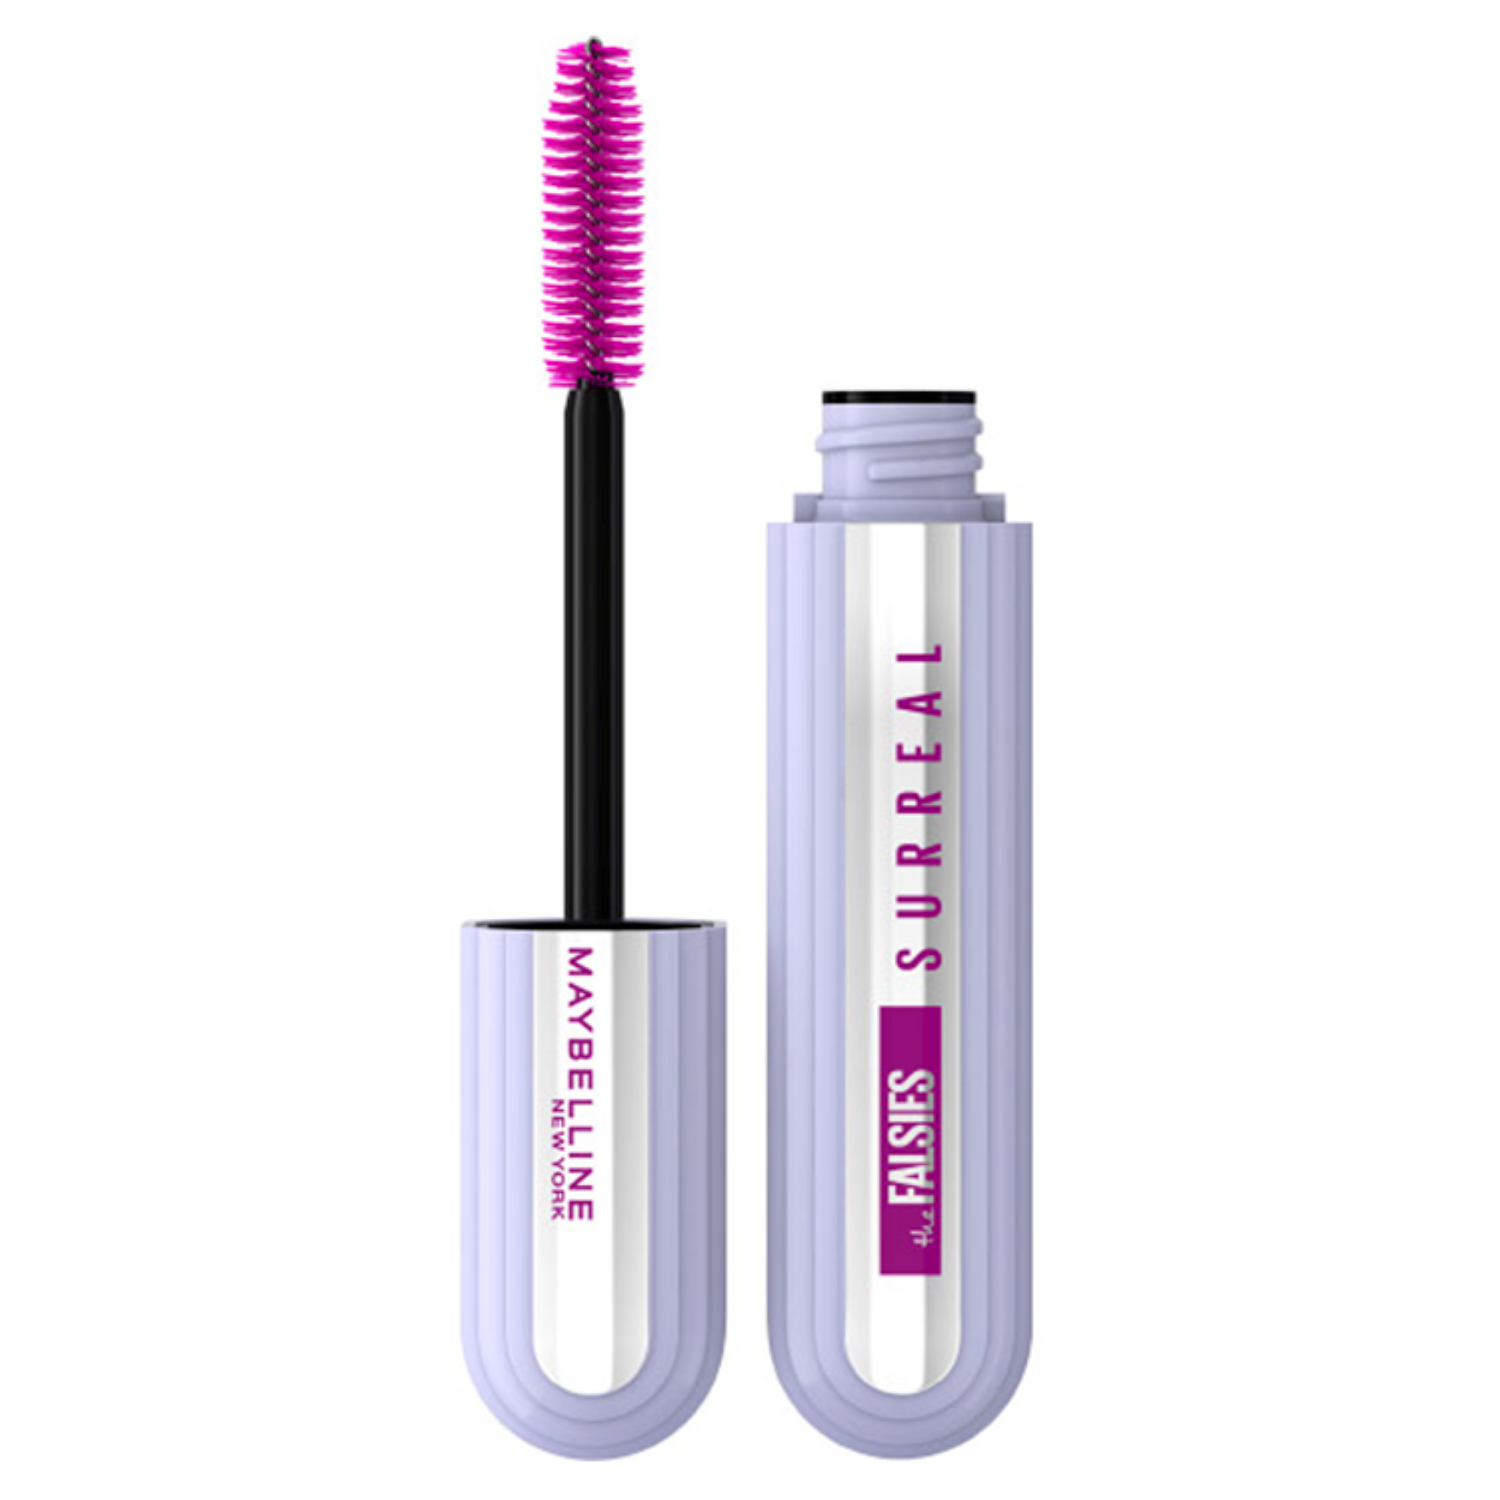 Maybelline New York Falsies Surreal Extensions Mascara – Black